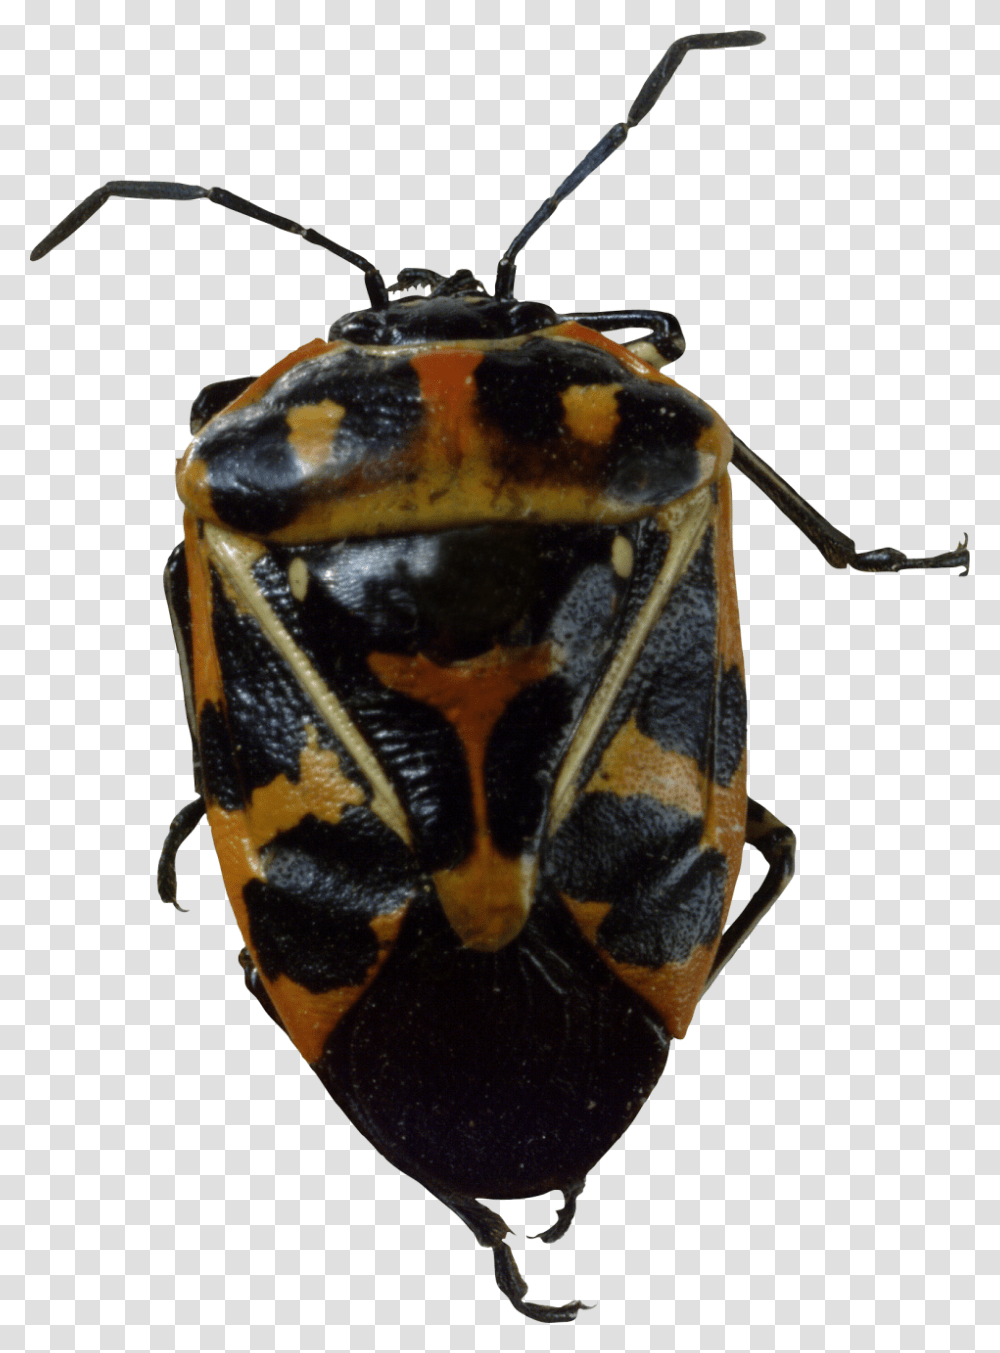 Bug Image, Insect, Invertebrate, Animal, Firefly Transparent Png